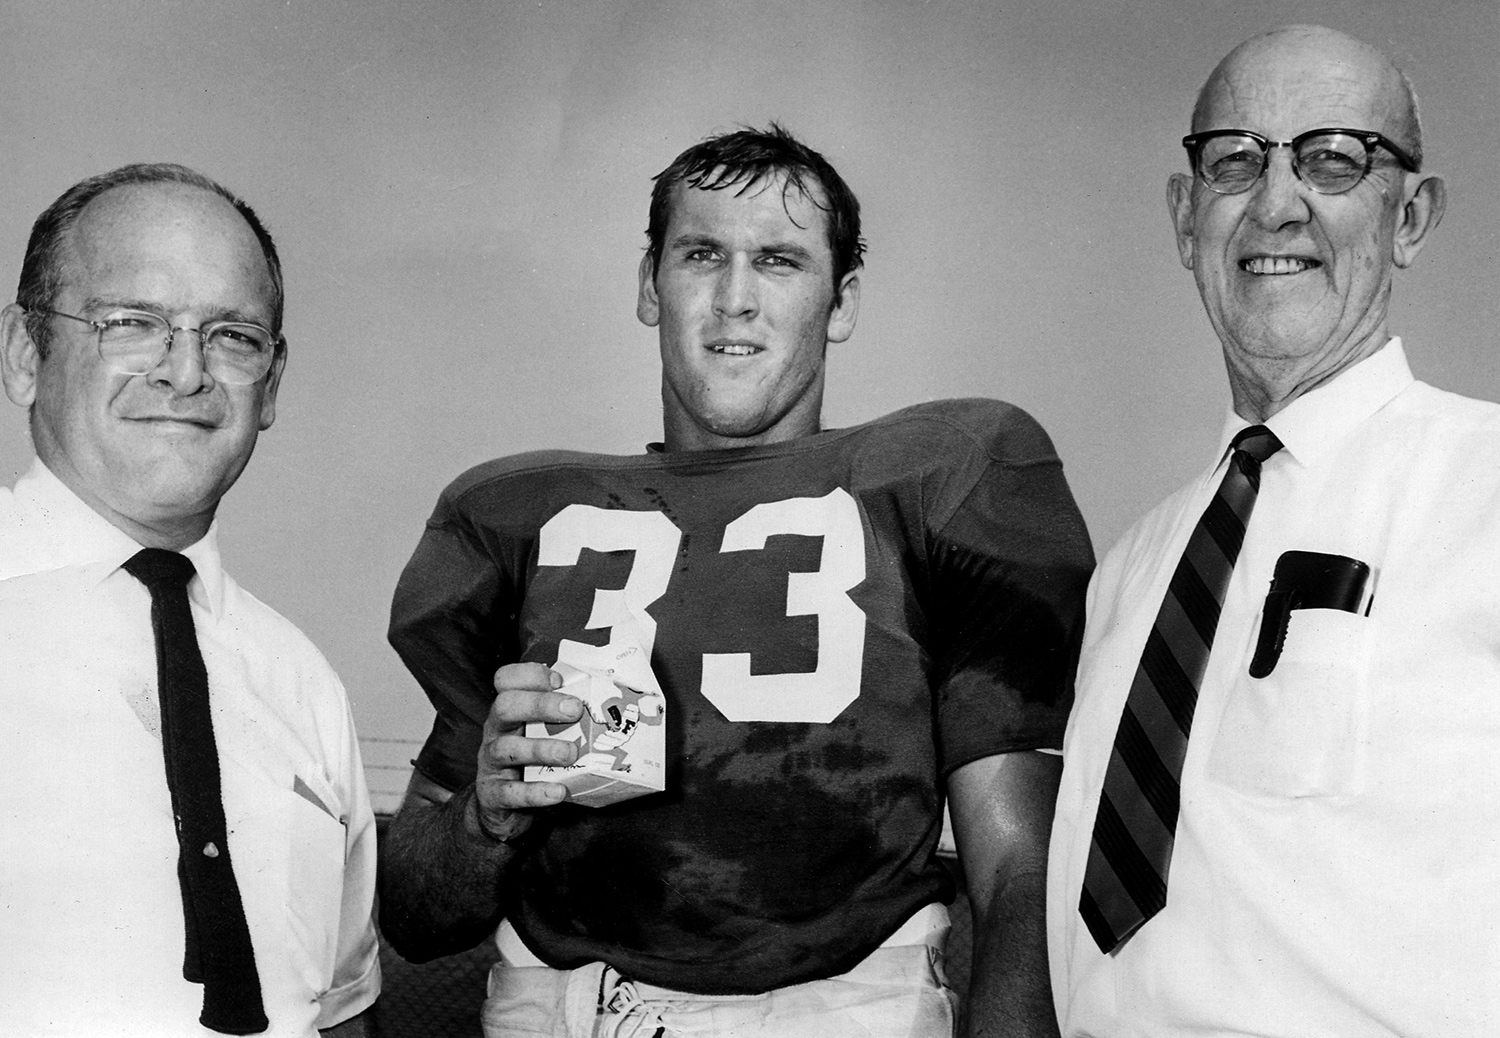 Football player holds carton of Gatorade and stands between two older men on a football field